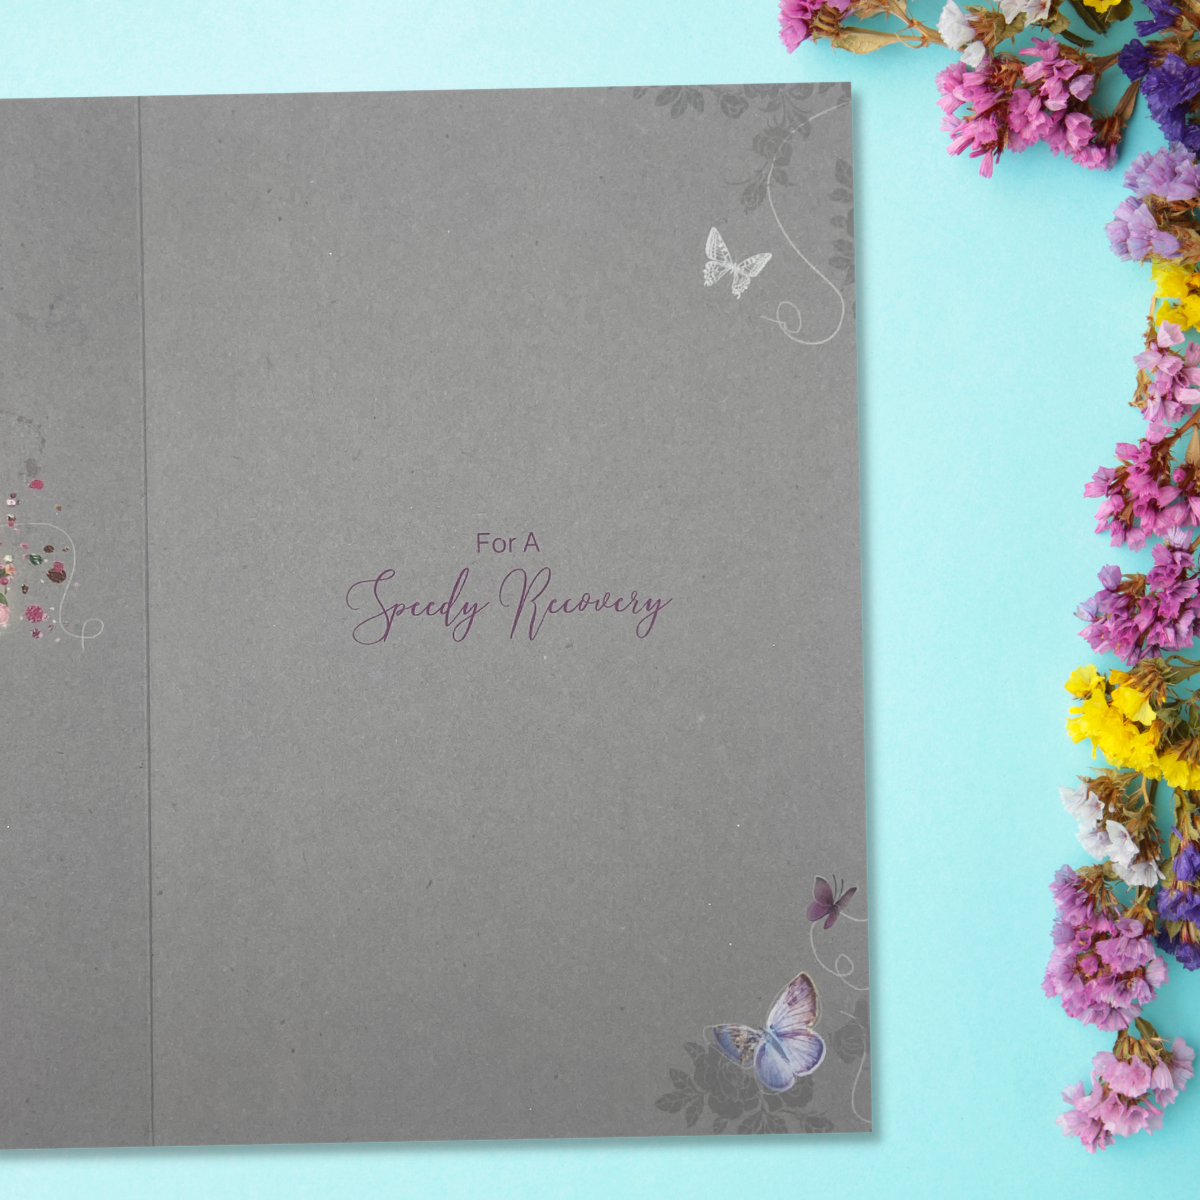 inside grey card with colour print and butterflies